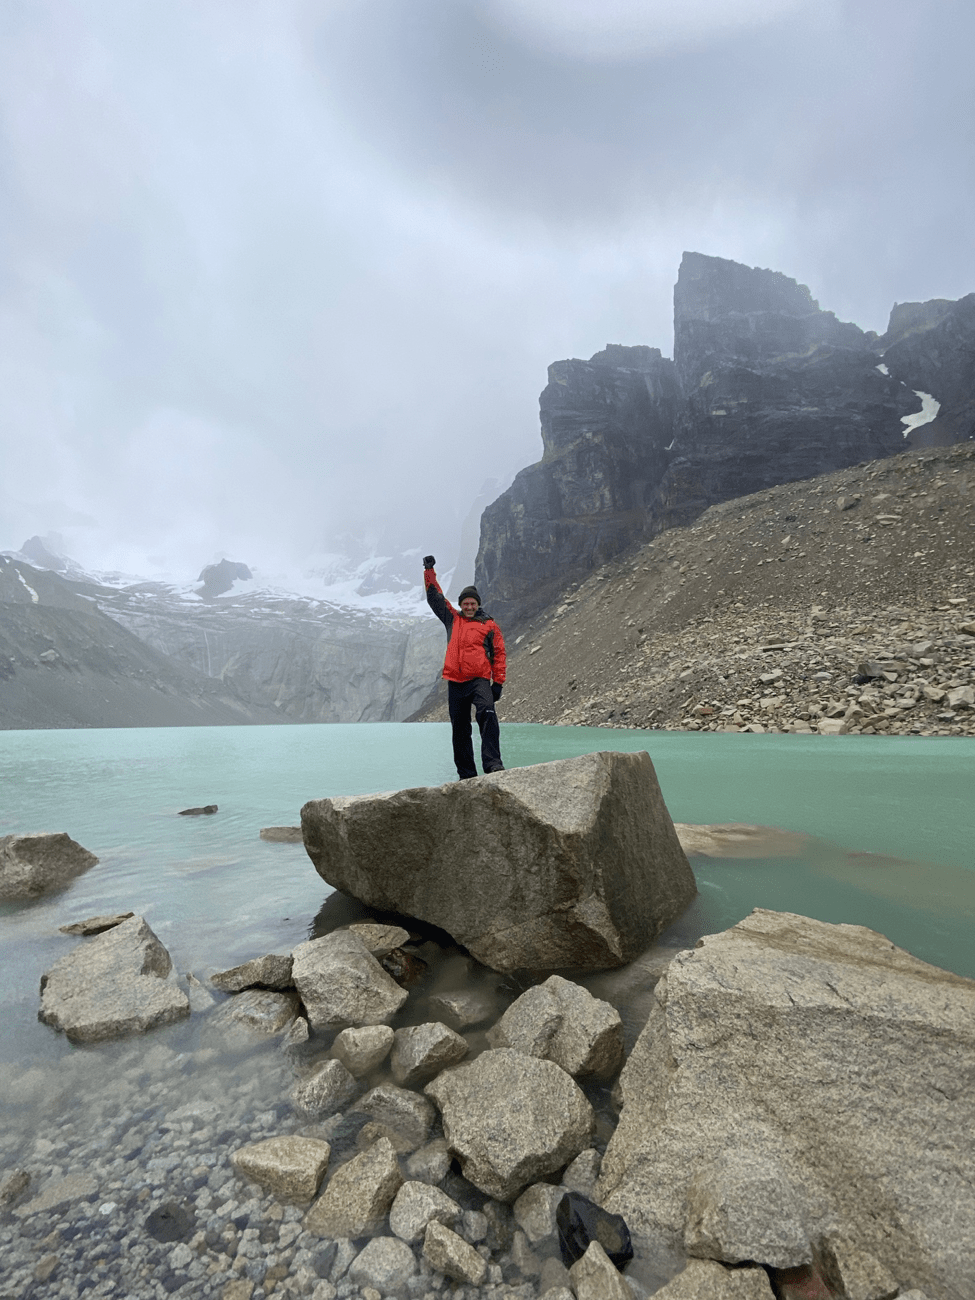 Lonny standing in hiking gear at Torres del Paine on a cloudy day